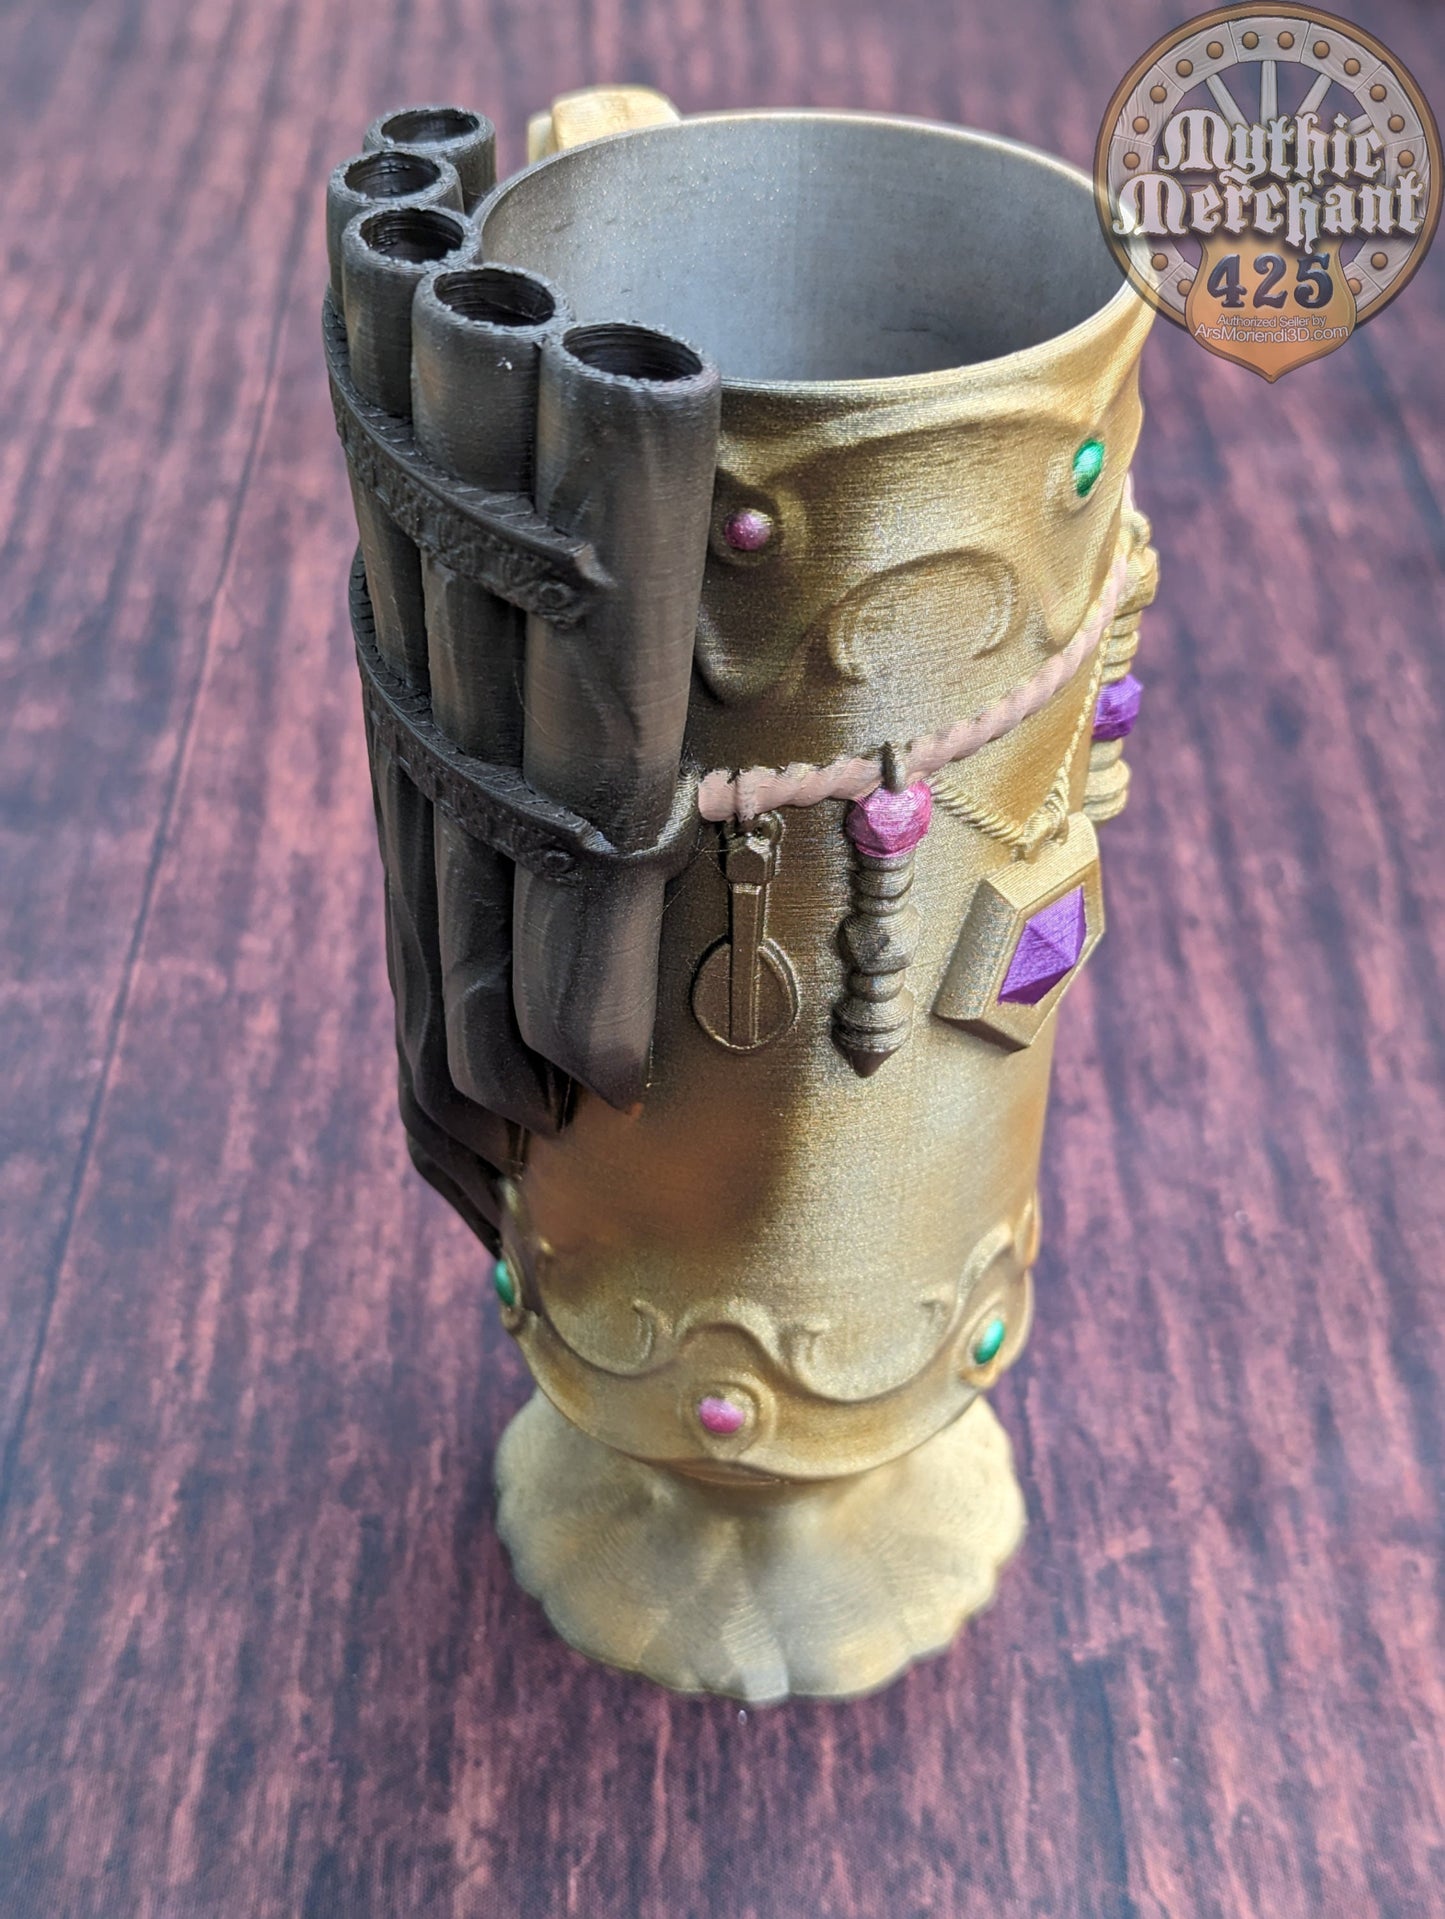 Bard Class 3D Printed Mythic Mug Stein | Tabletop RPG Gaming Cosplay - Dungeons and Dragon DnD D&D Wargaming | Drink Koozie Can Holder.